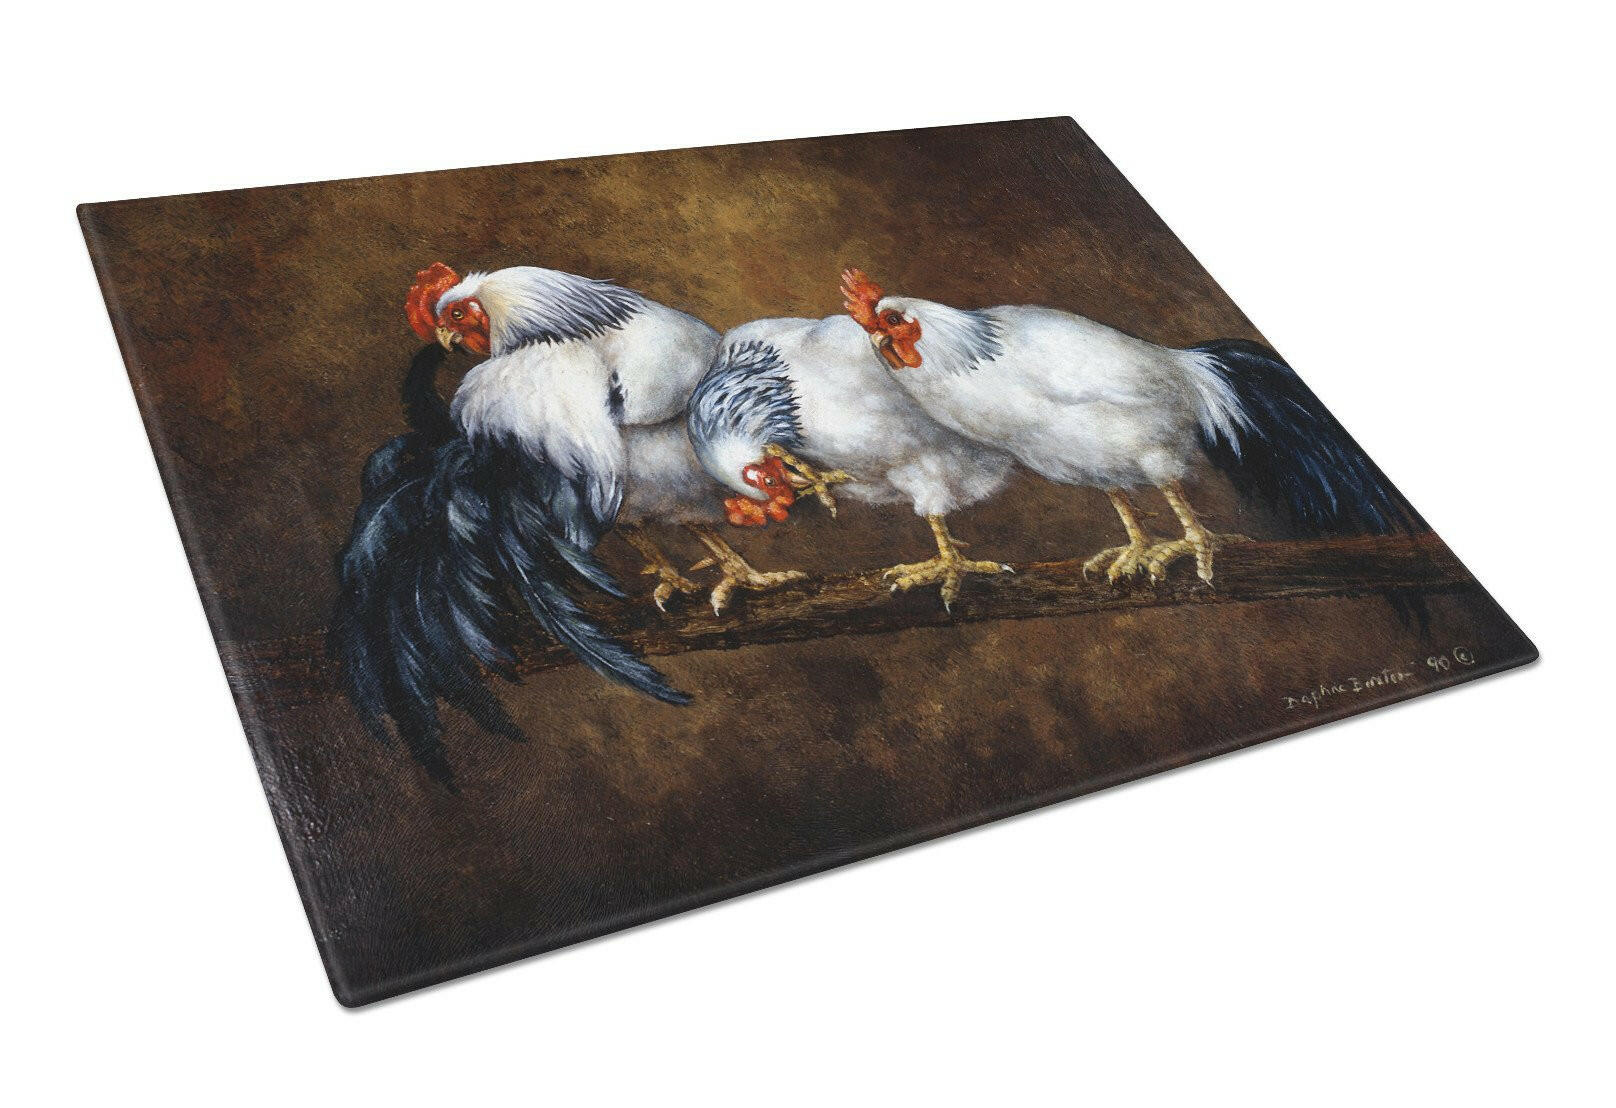 Roosting Rooster and Chickens Glass Cutting Board Large BDBA0081LCB by Caroline's Treasures